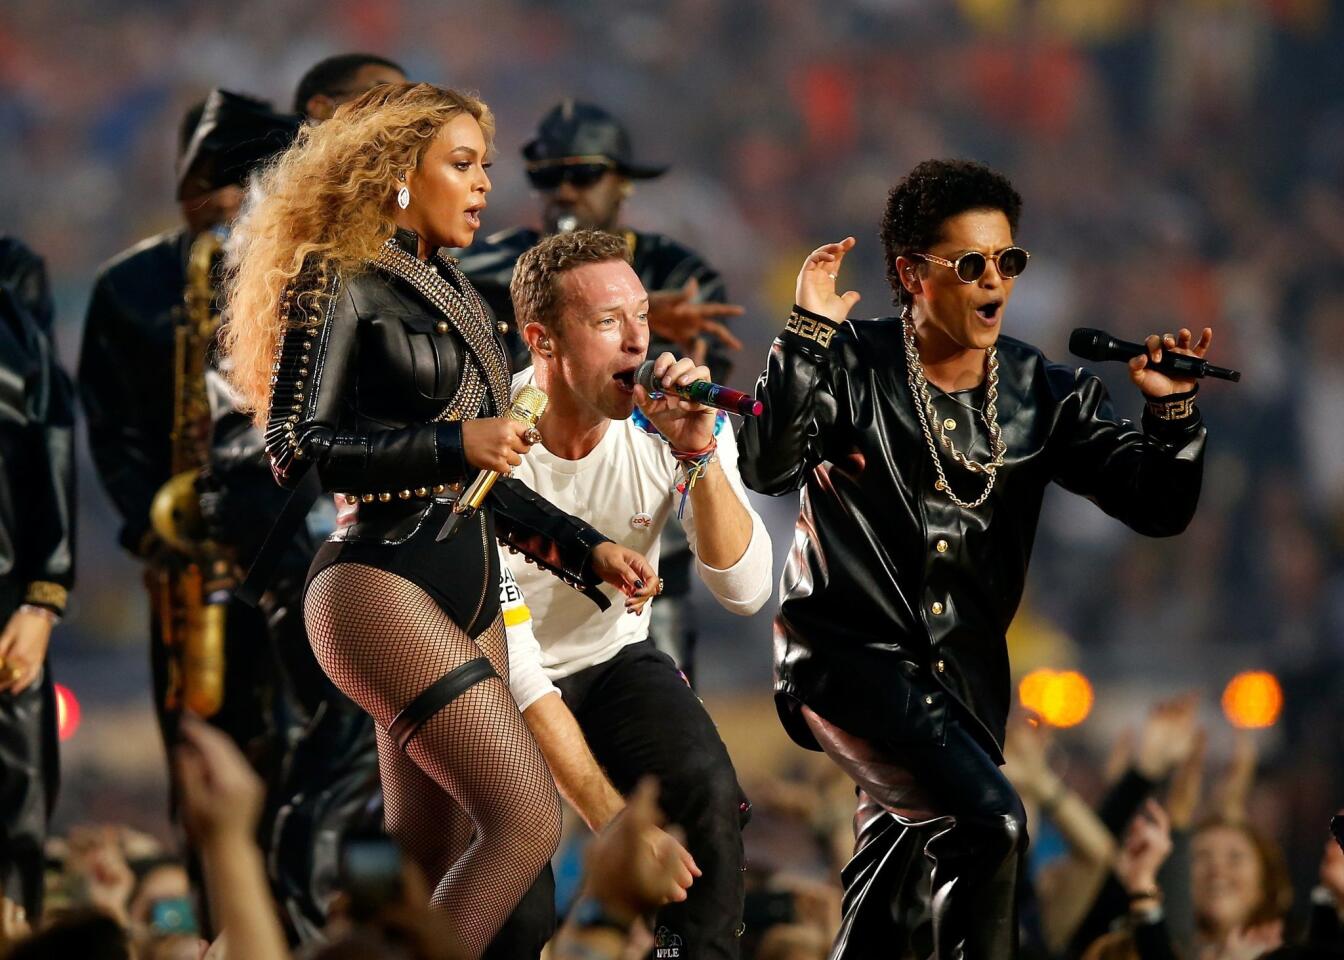 Beyonce, Chris Martin of Coldplay and Bruno Mars perform during the Pepsi Super Bowl 50 Halftime Show at Levi's Stadium on February 7, 2016 in Santa Clara, California. Photo by Ezra Shaw/Getty Images